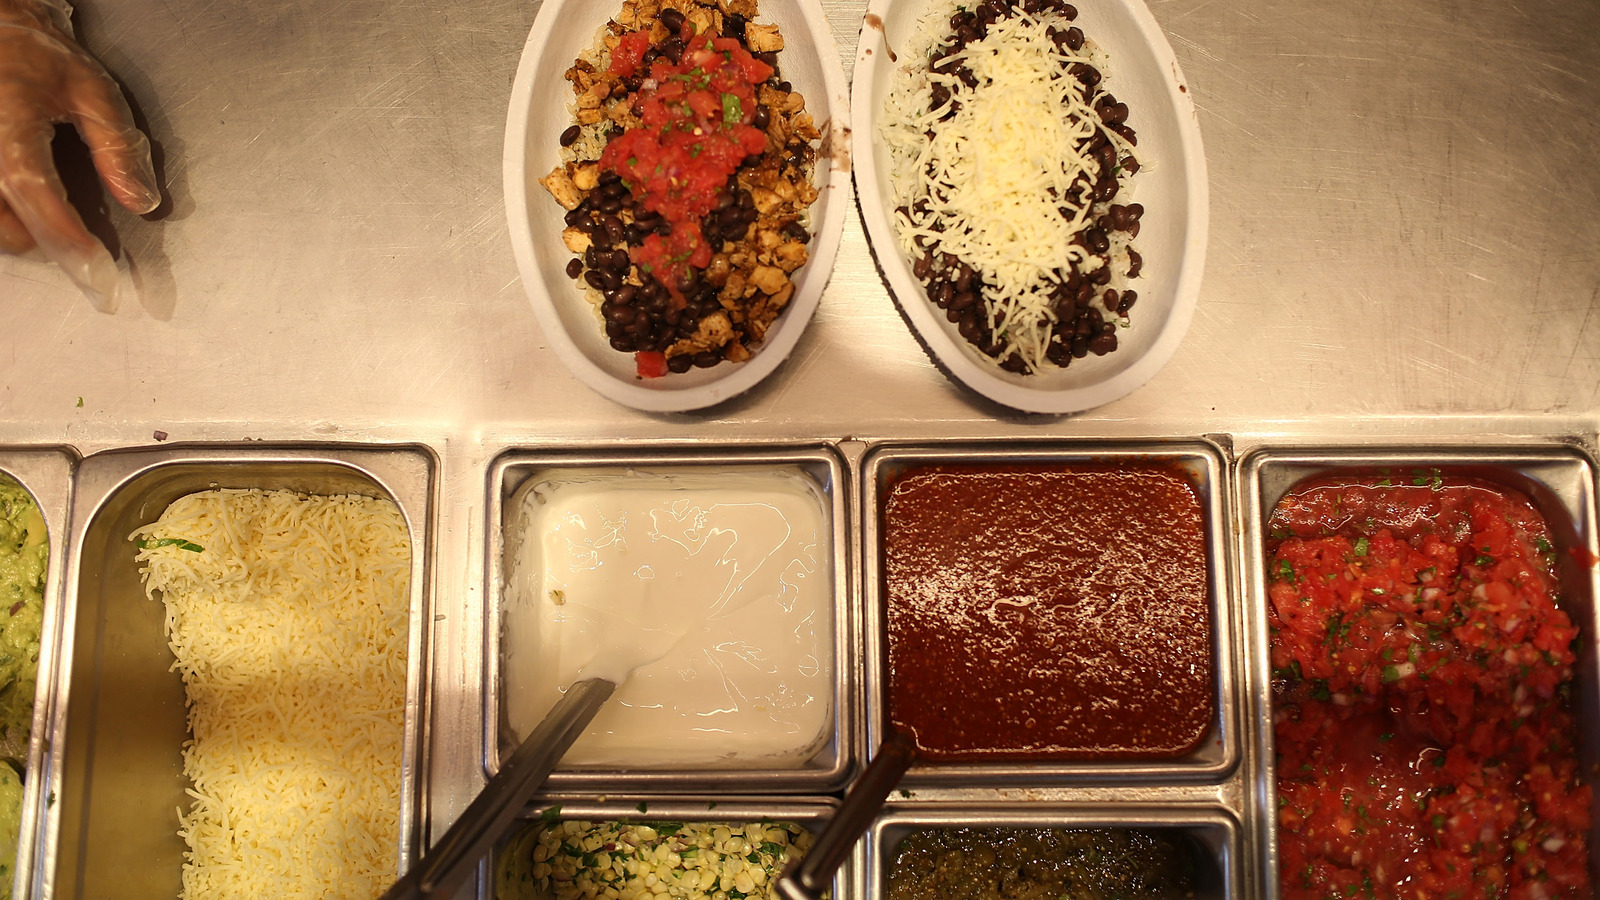 The Worst Salsa At Chipotle According To 28% Of People